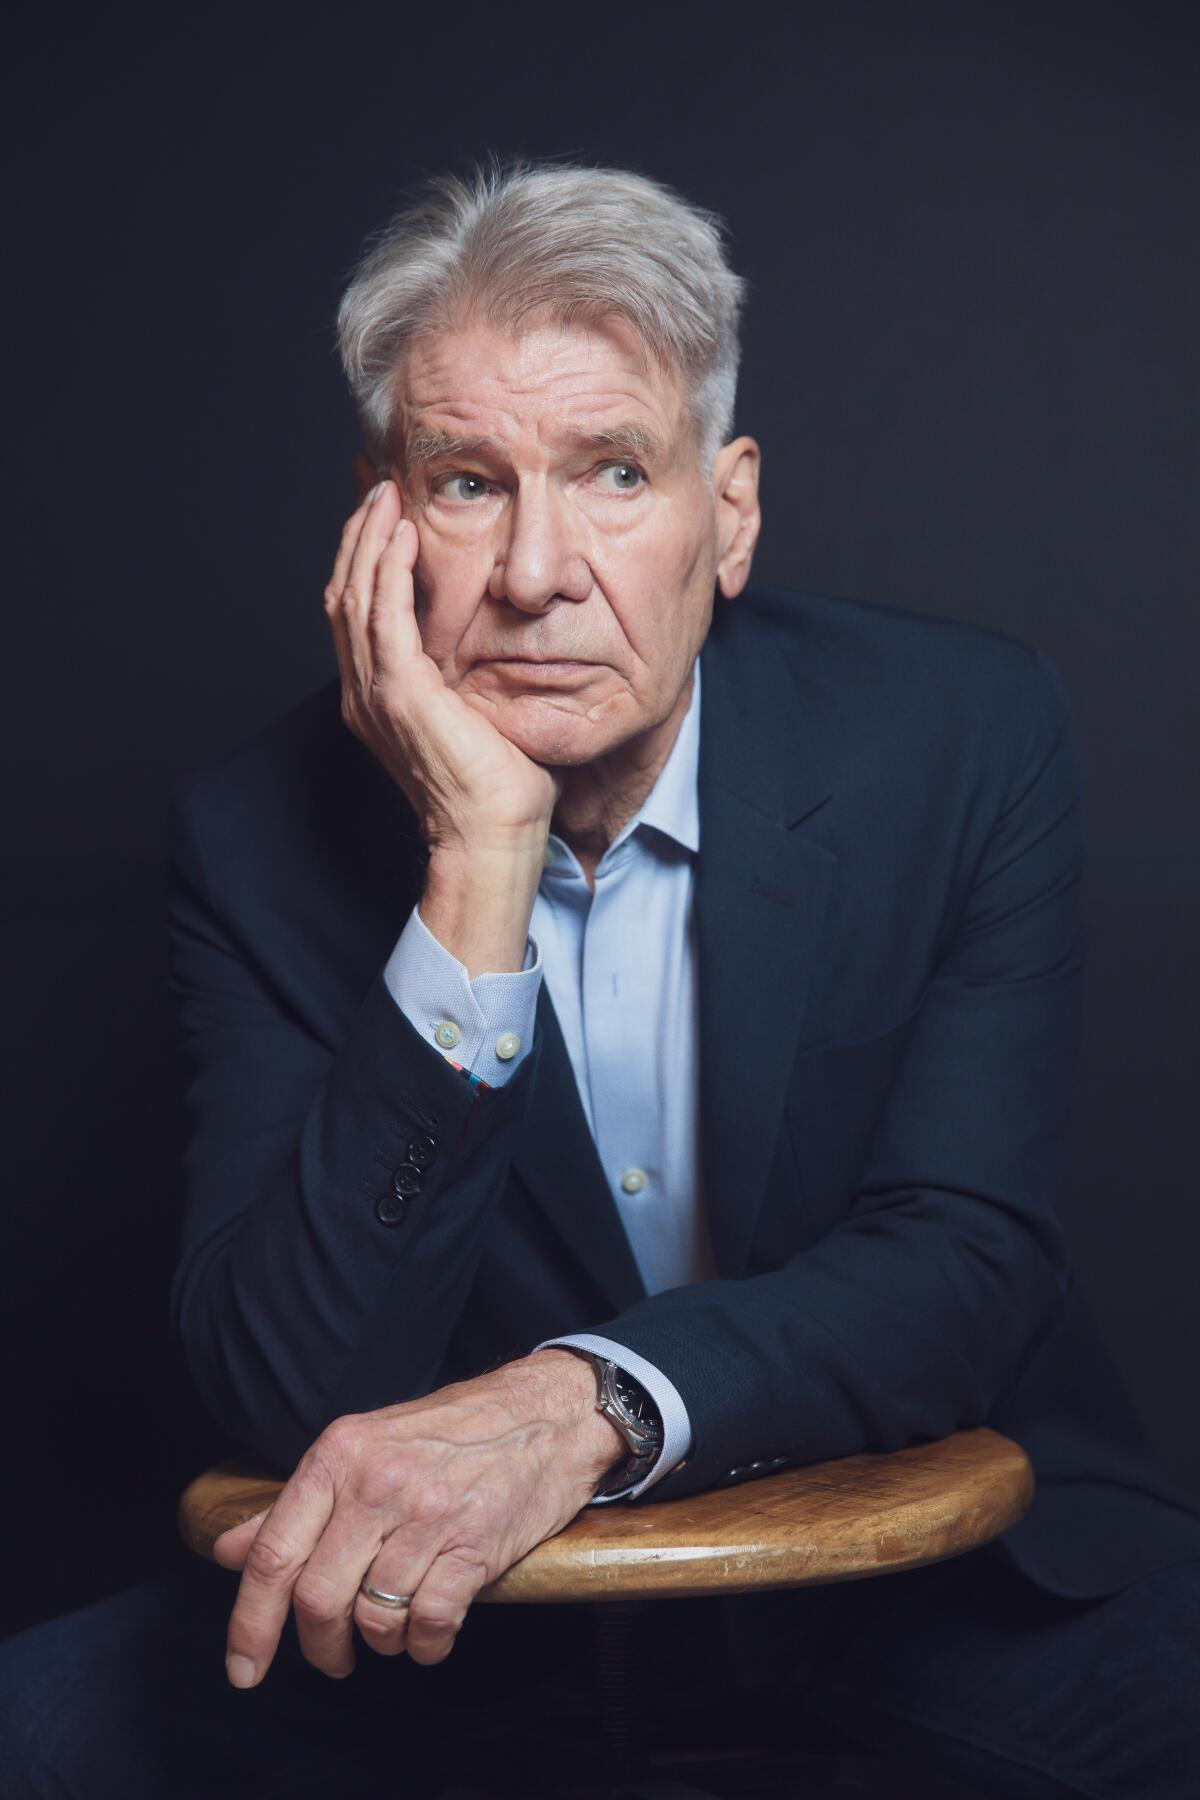 Harrison Ford holds one hand to his face and leans against a stool.